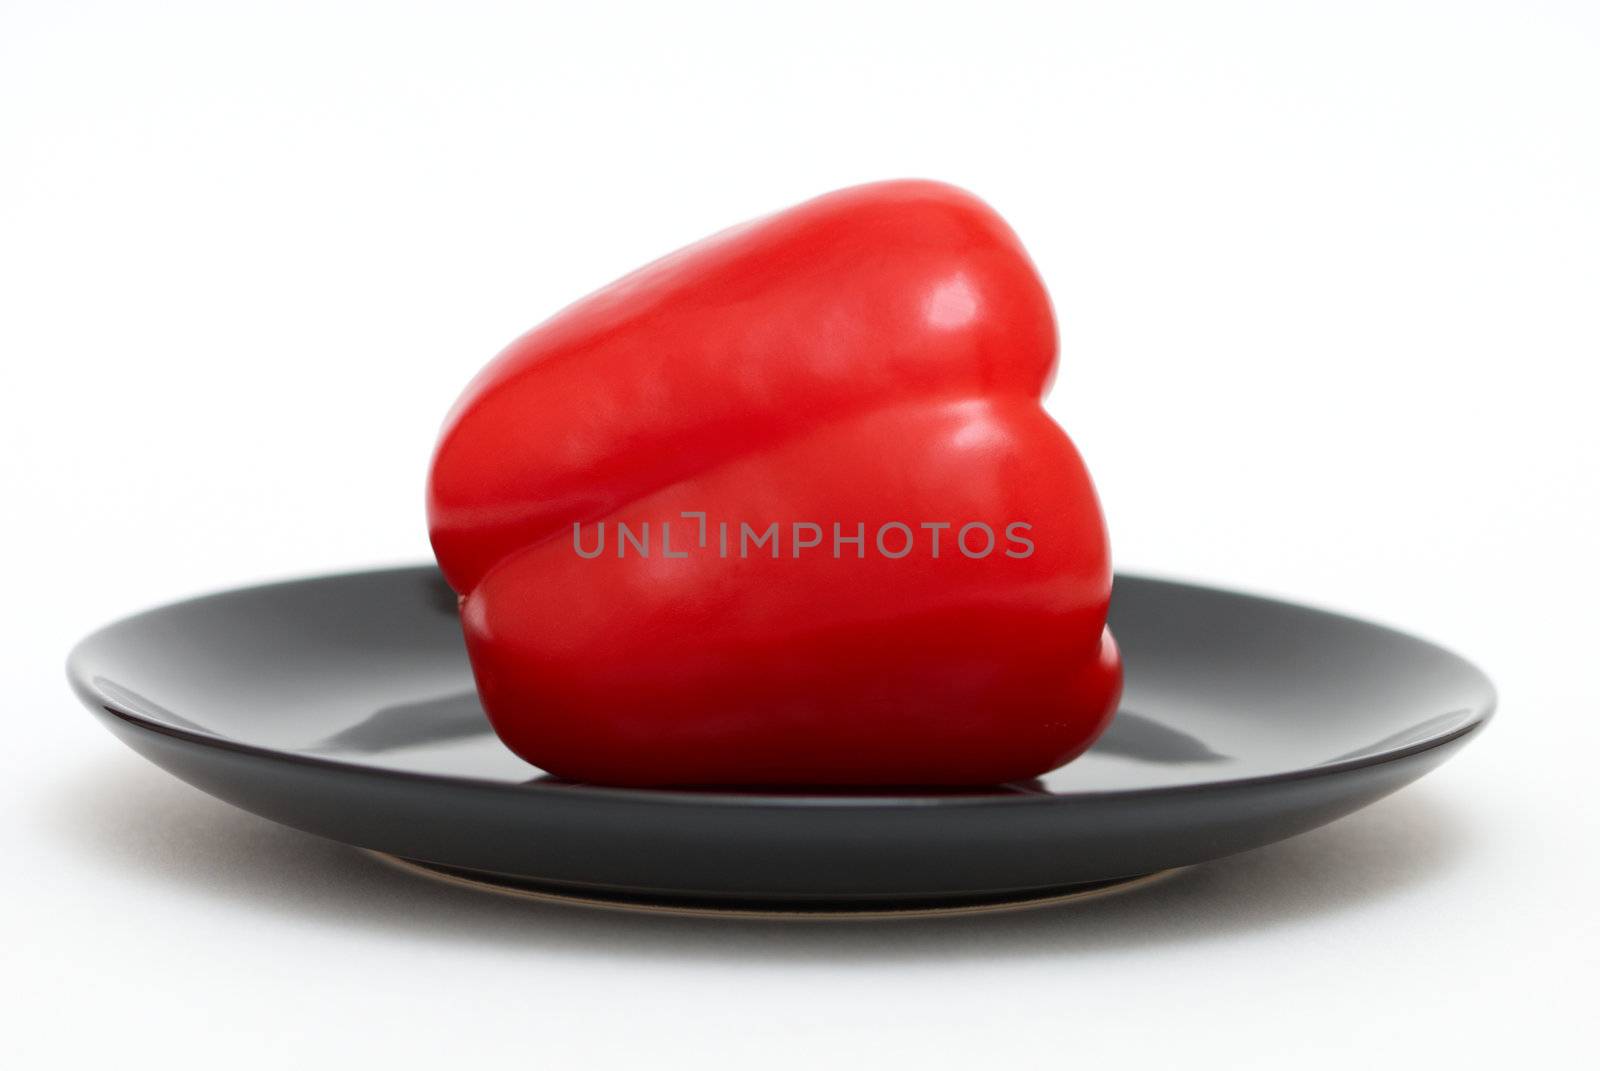 Red pepper on a black plate